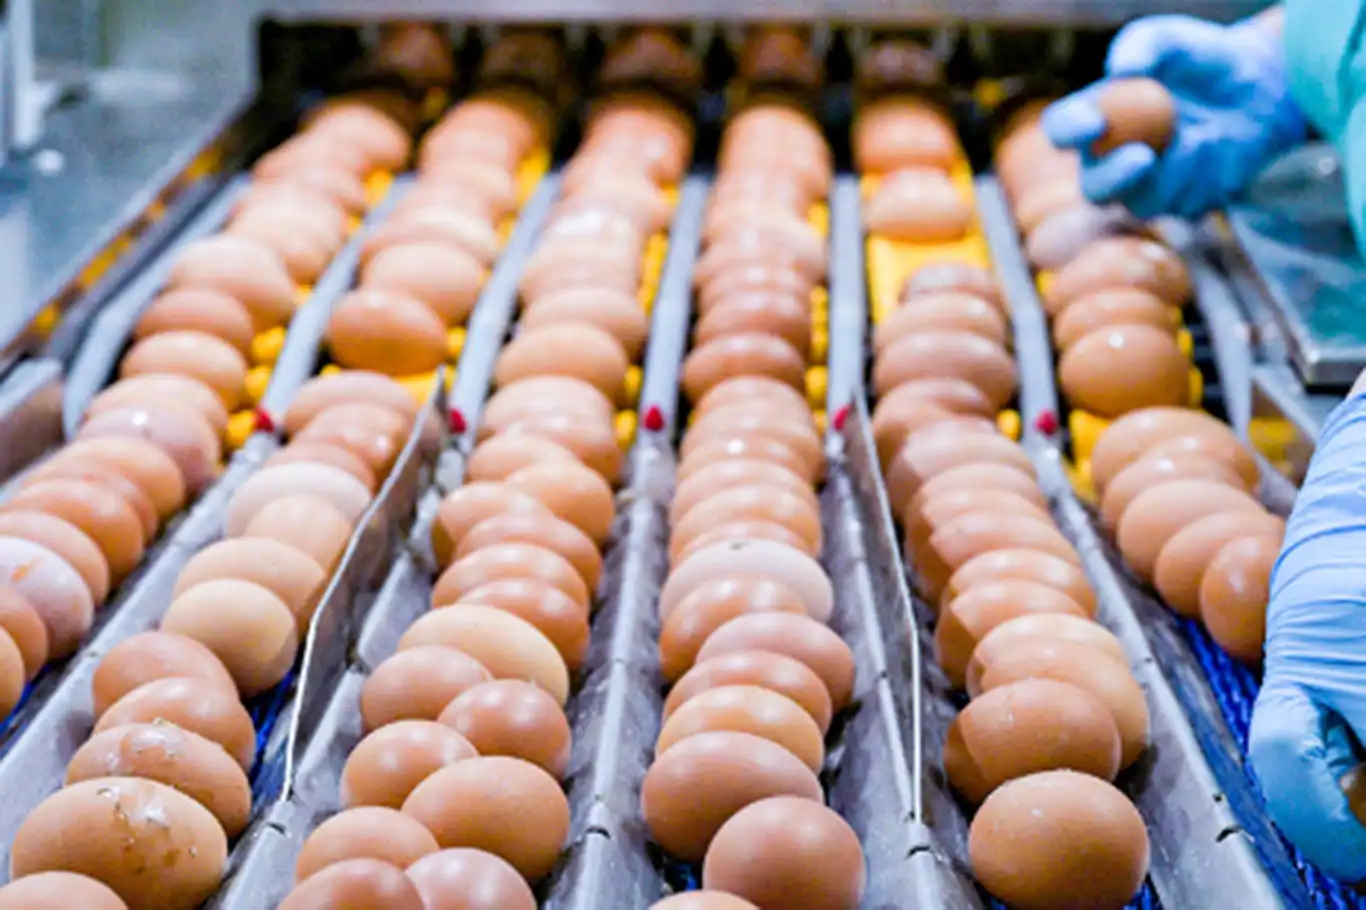 Russia allows duty-free import of chicken eggs to control prices